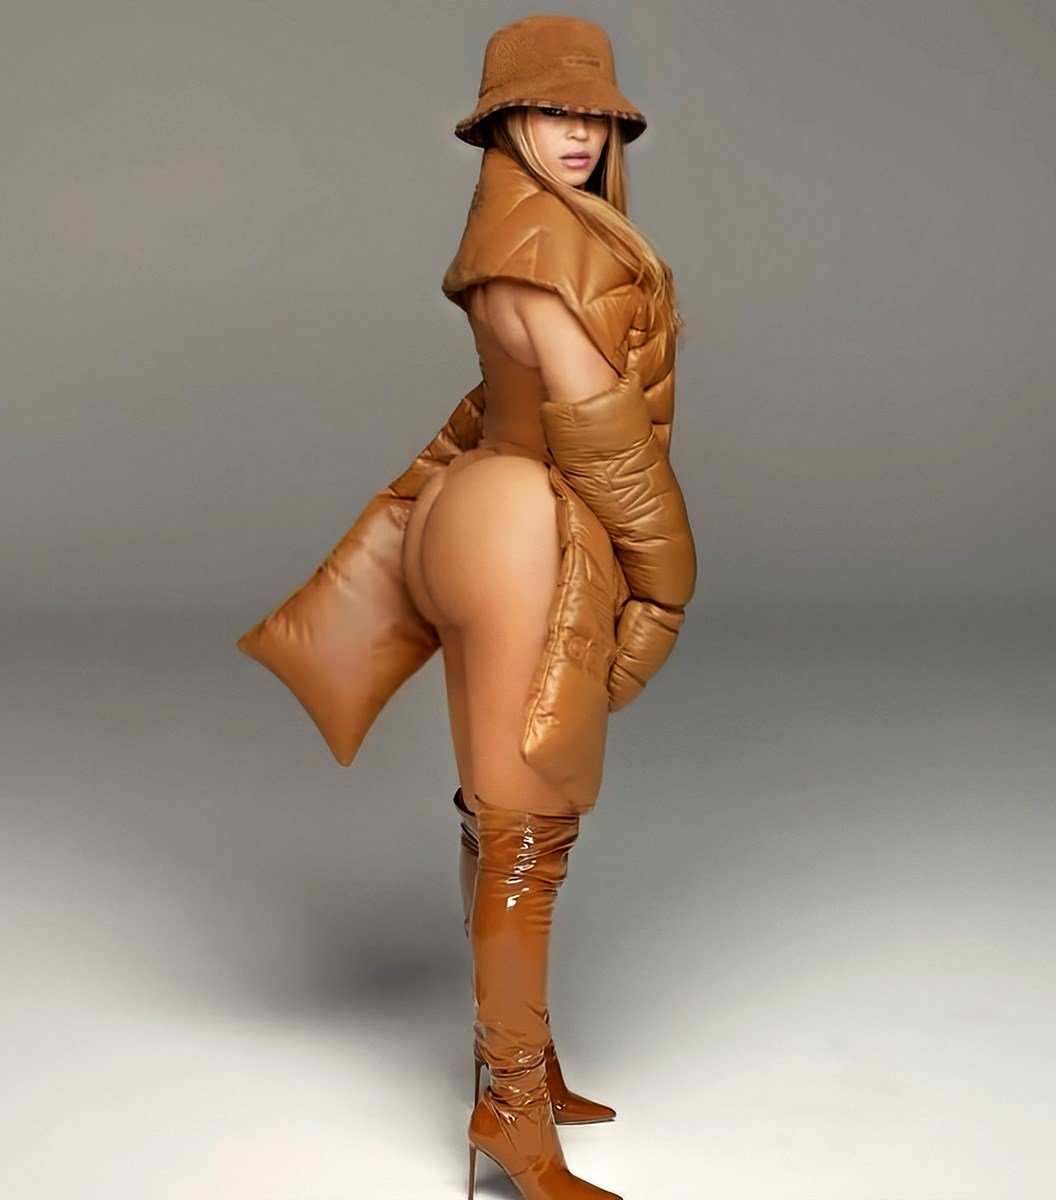 Beyonce Launches New Career As A Thong Ass Model